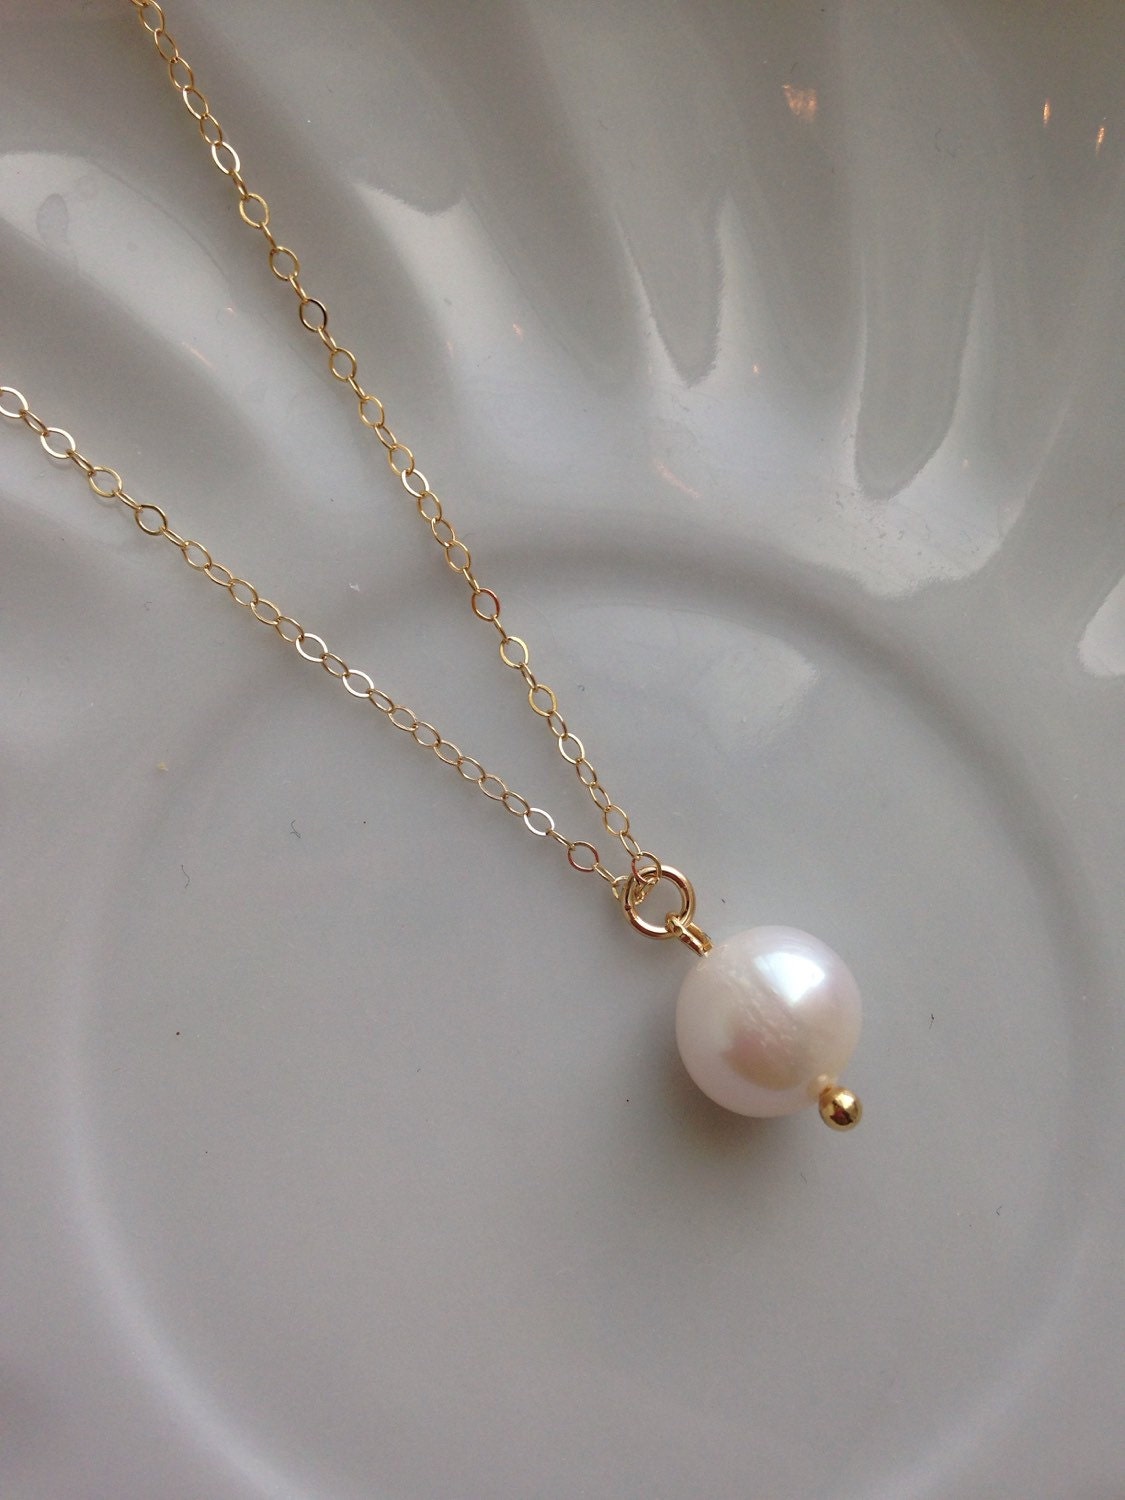 Gold Freshwater Pearl Jewelry Set Champagne Blush Earrings Necklace Set - Gold filled chain - Pink Peach Jewelry Set Gold